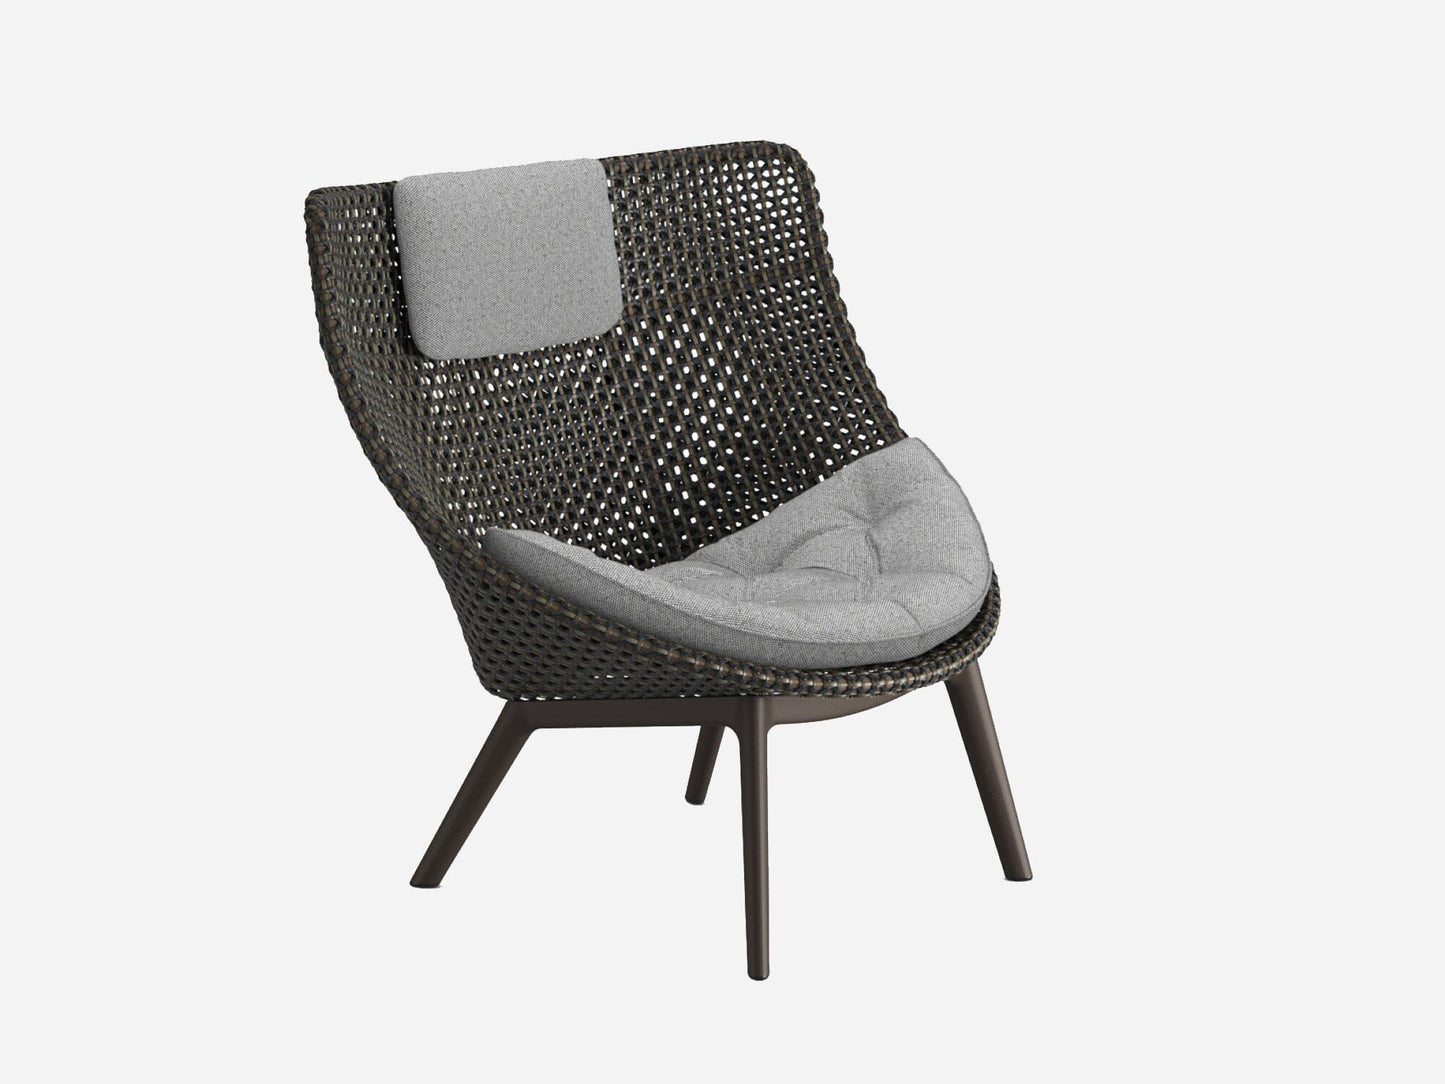 MBRACE ALU Wing Chair Outdoor Furniture DEDON 